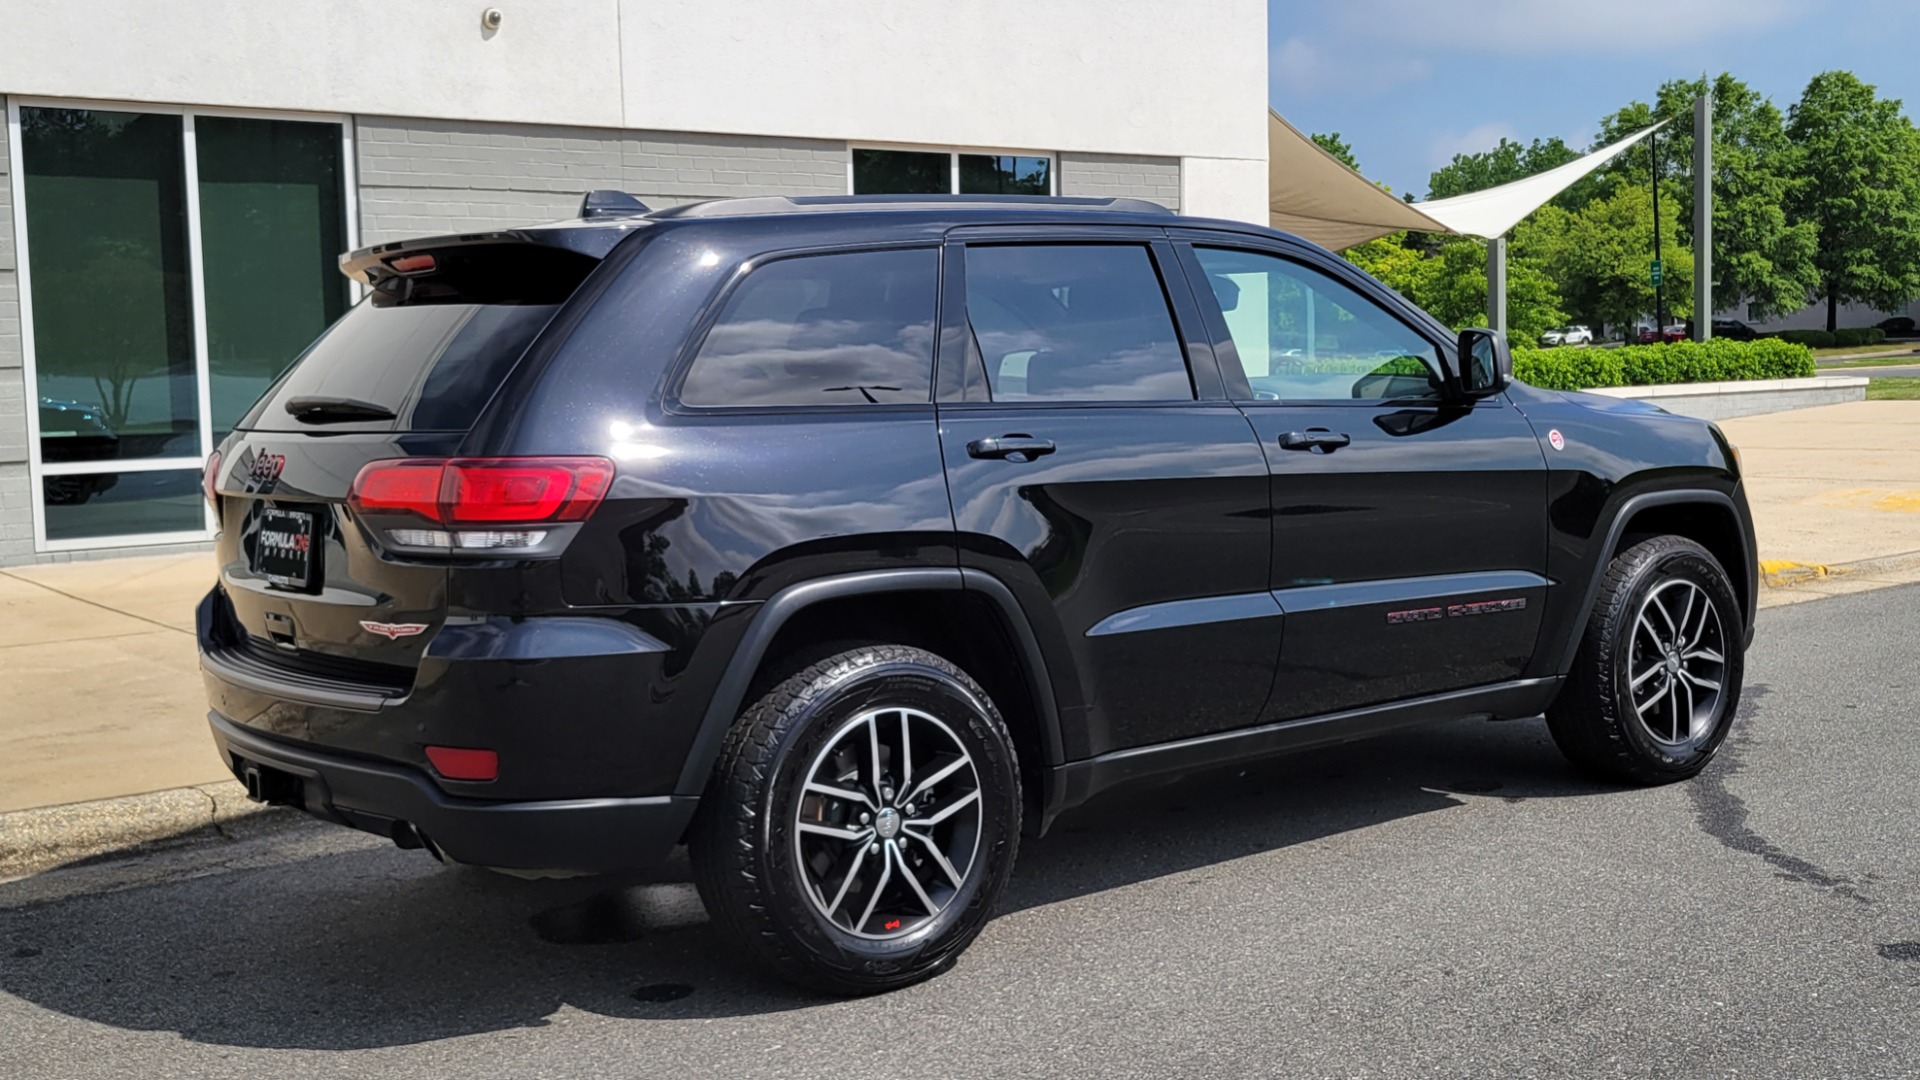 Used 2018 Jeep GRAND CHEROKEE TRAILHAWK 4X4 / 3.6L / NAV / BLIND SPOT / REARVIEW for sale $38,000 at Formula Imports in Charlotte NC 28227 9